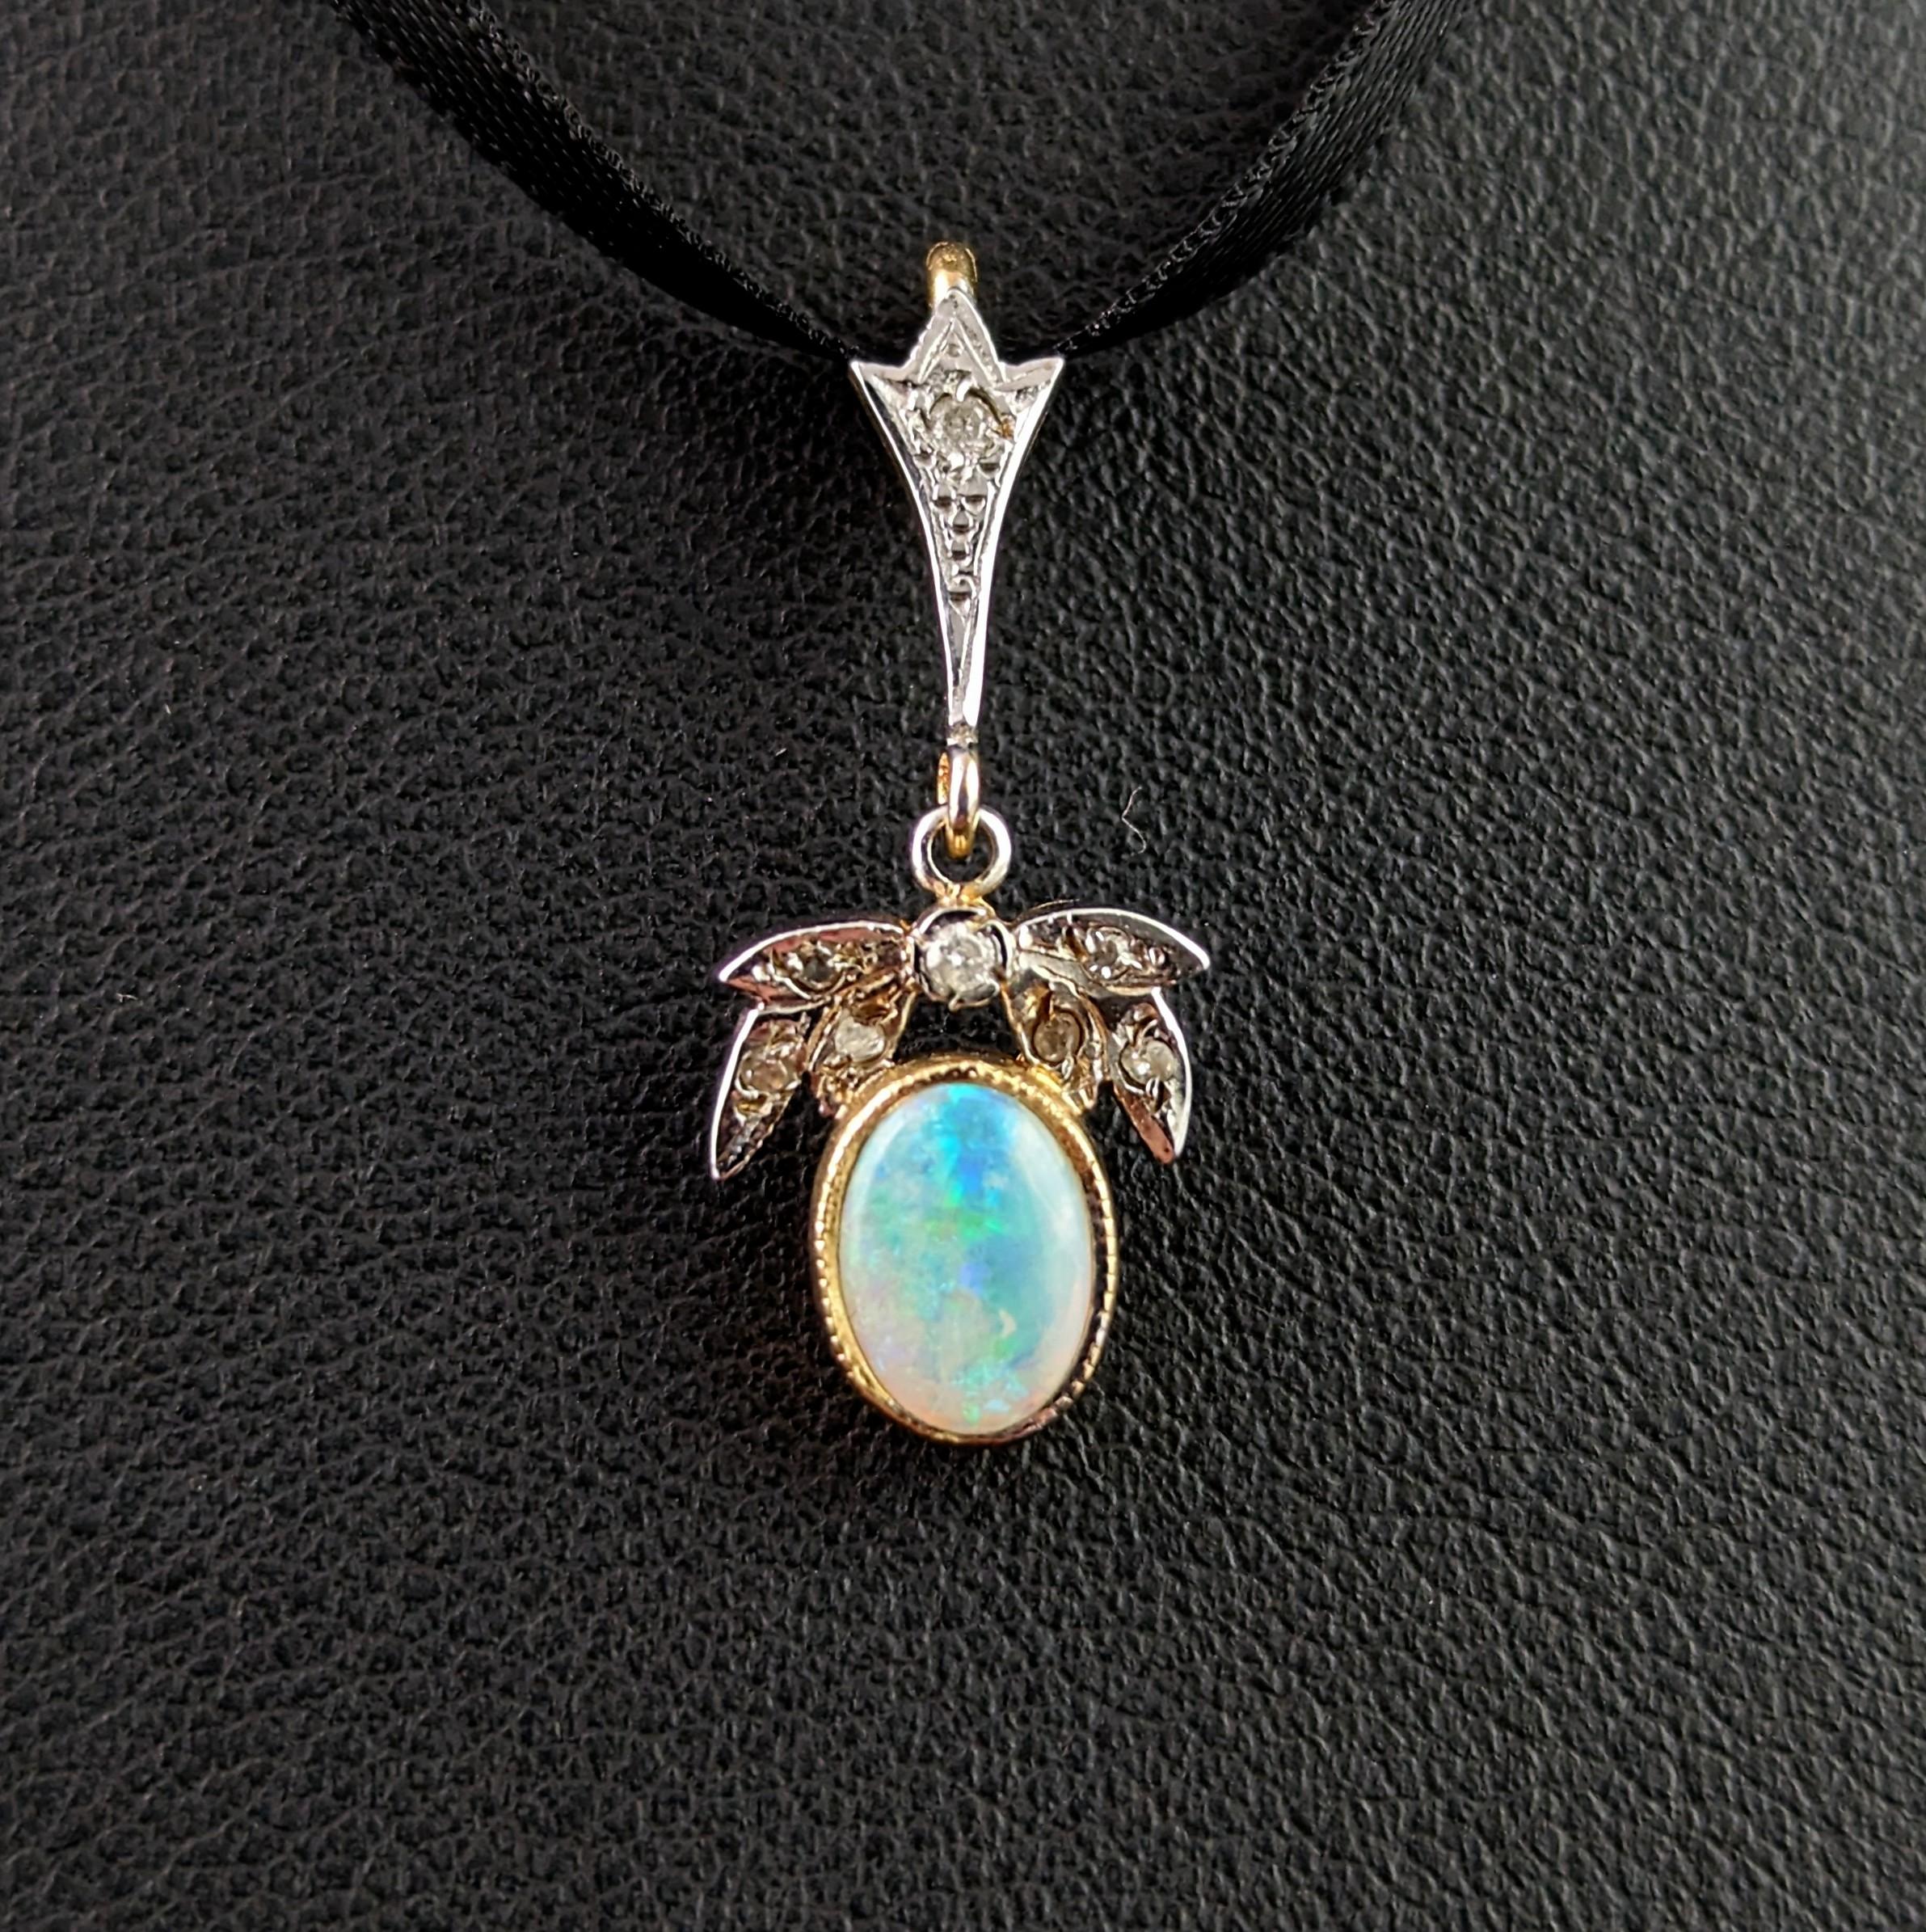 A pretty and dainty vintage Opal and Diamond pendant.

It is crafted from 9ct yellow gold with a white gold front and designed in the Art Deco style.

The bale is set with a small diamond and suspended from there is a tiny drop designed with diamond